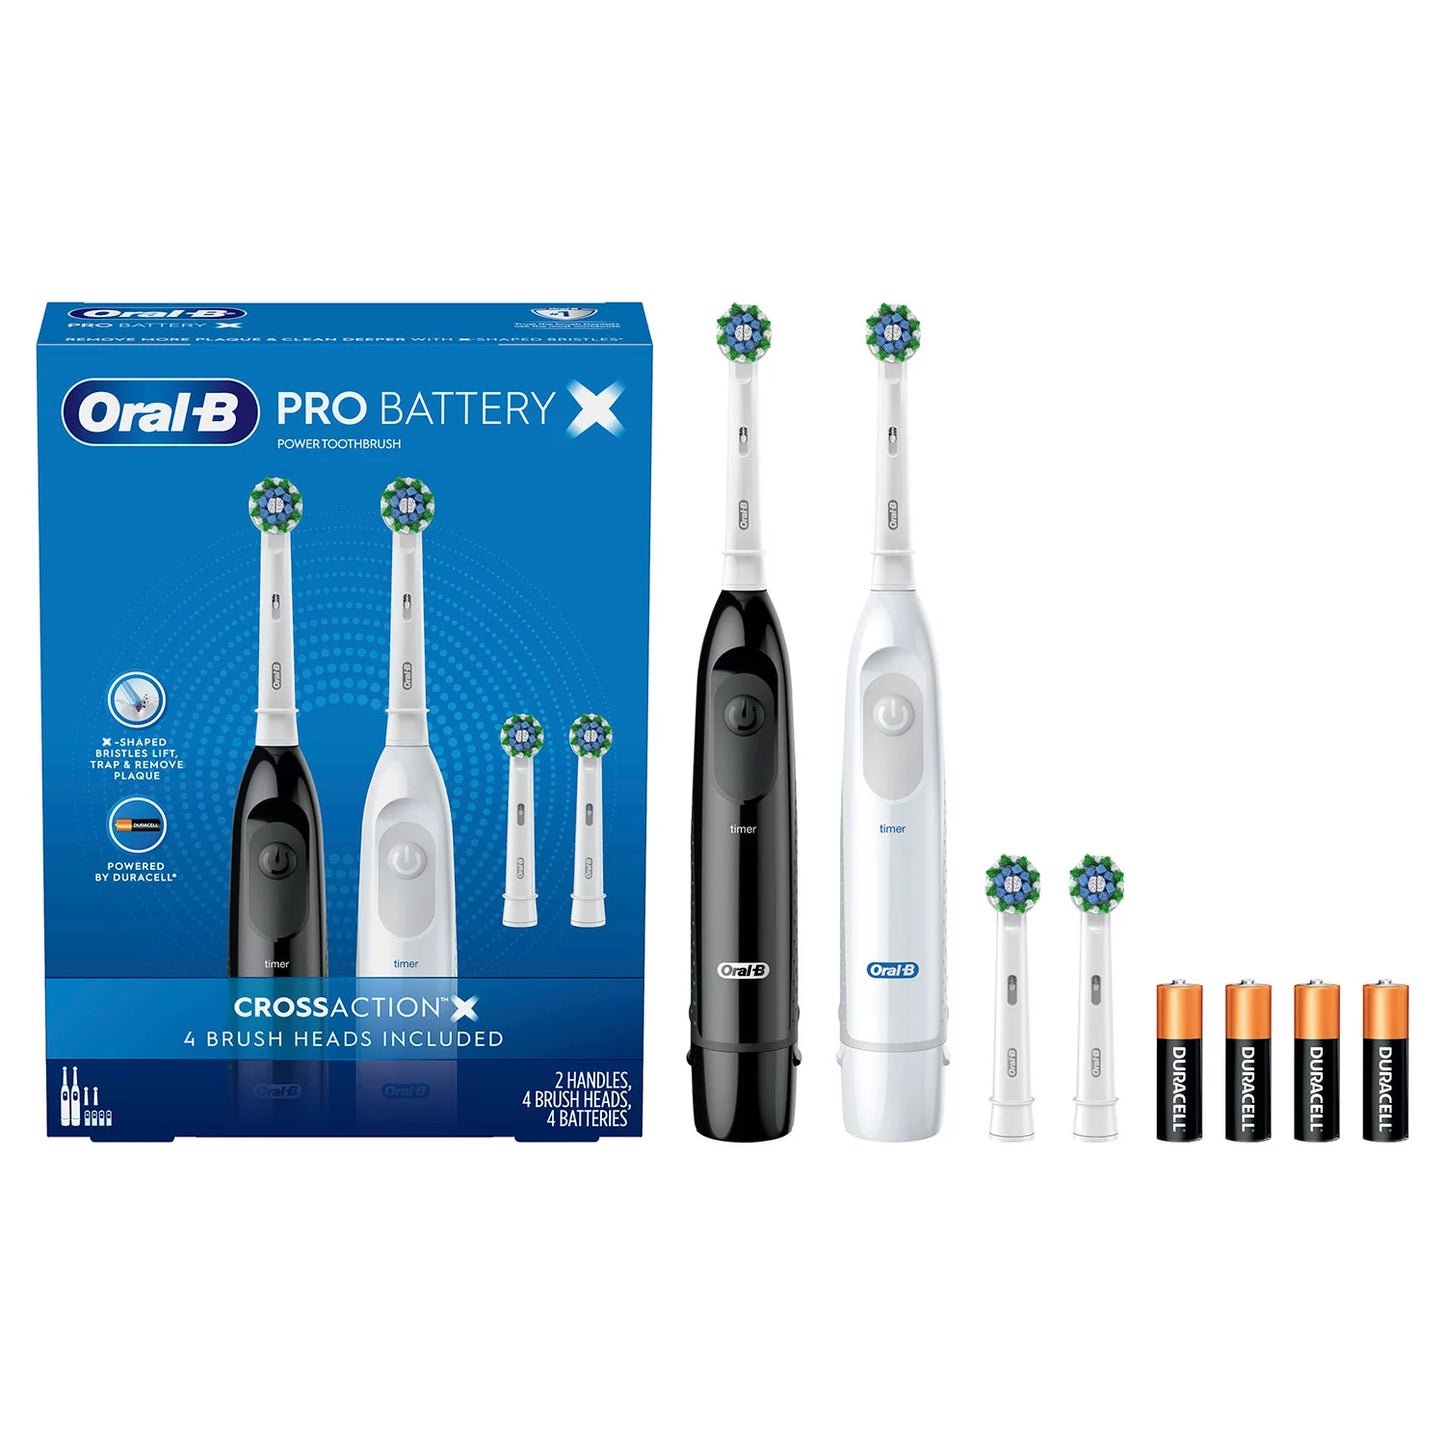 Oral-B Pro Advantage Battery-Powered Toothbrush (2 Handles + 4 Brush Heads)